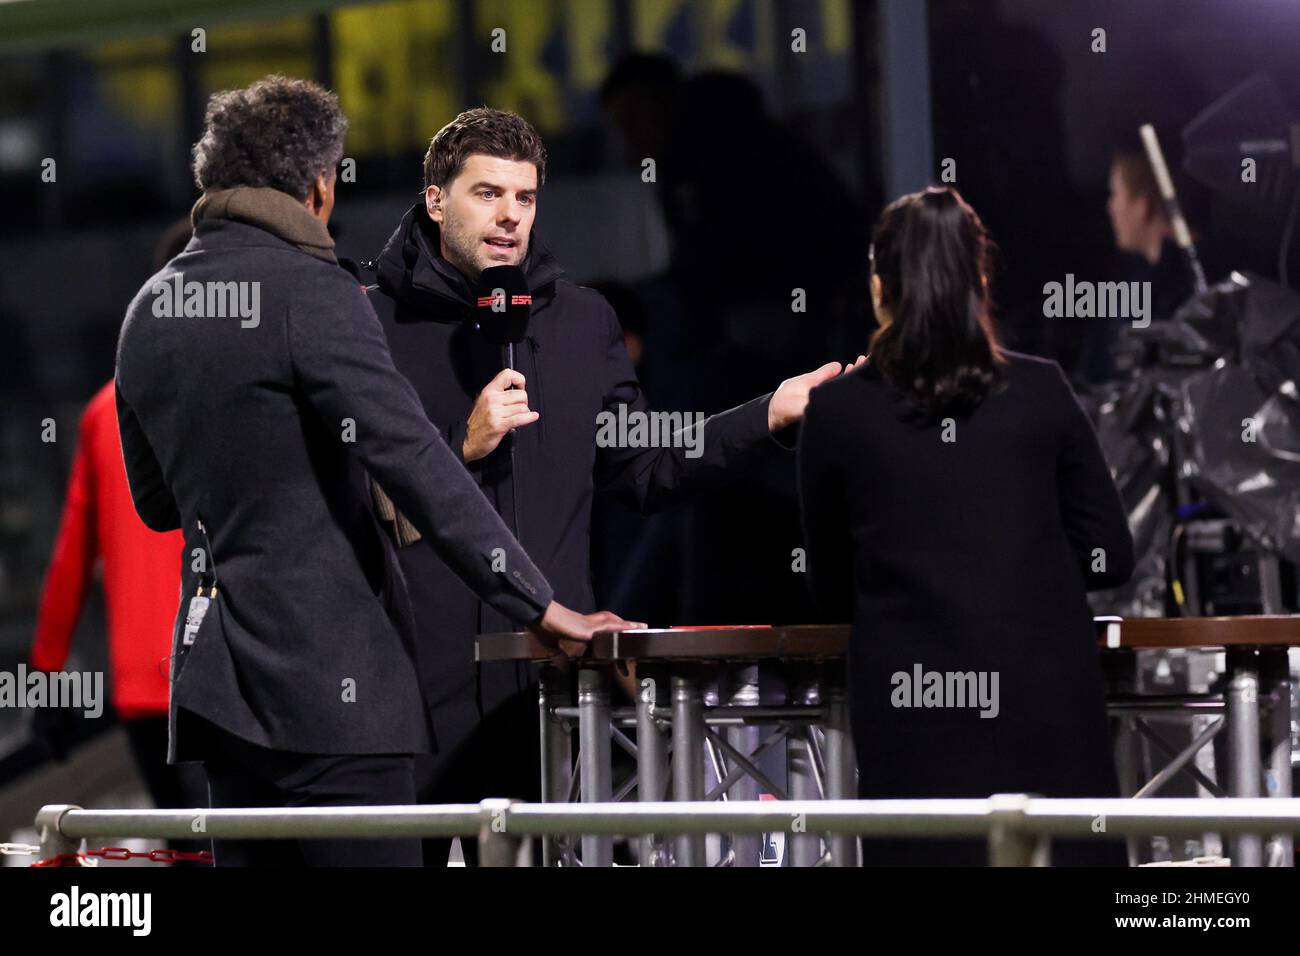 WAALWIJK, NETHERLANDS - FEBRUARY 9: Pierre van Hooijdonk and Kees Kwakman and Fresia Cousino Arias of ESPN during the Dutch TOTO KNVB Cup Quarter Final match between RKC Waalwijk and AZ at the Mandemakers Stadion on February 9, 2022 in Waalwijk, Netherlands (Photo by Marcel ter Bals/Orange Pictures) Stock Photo